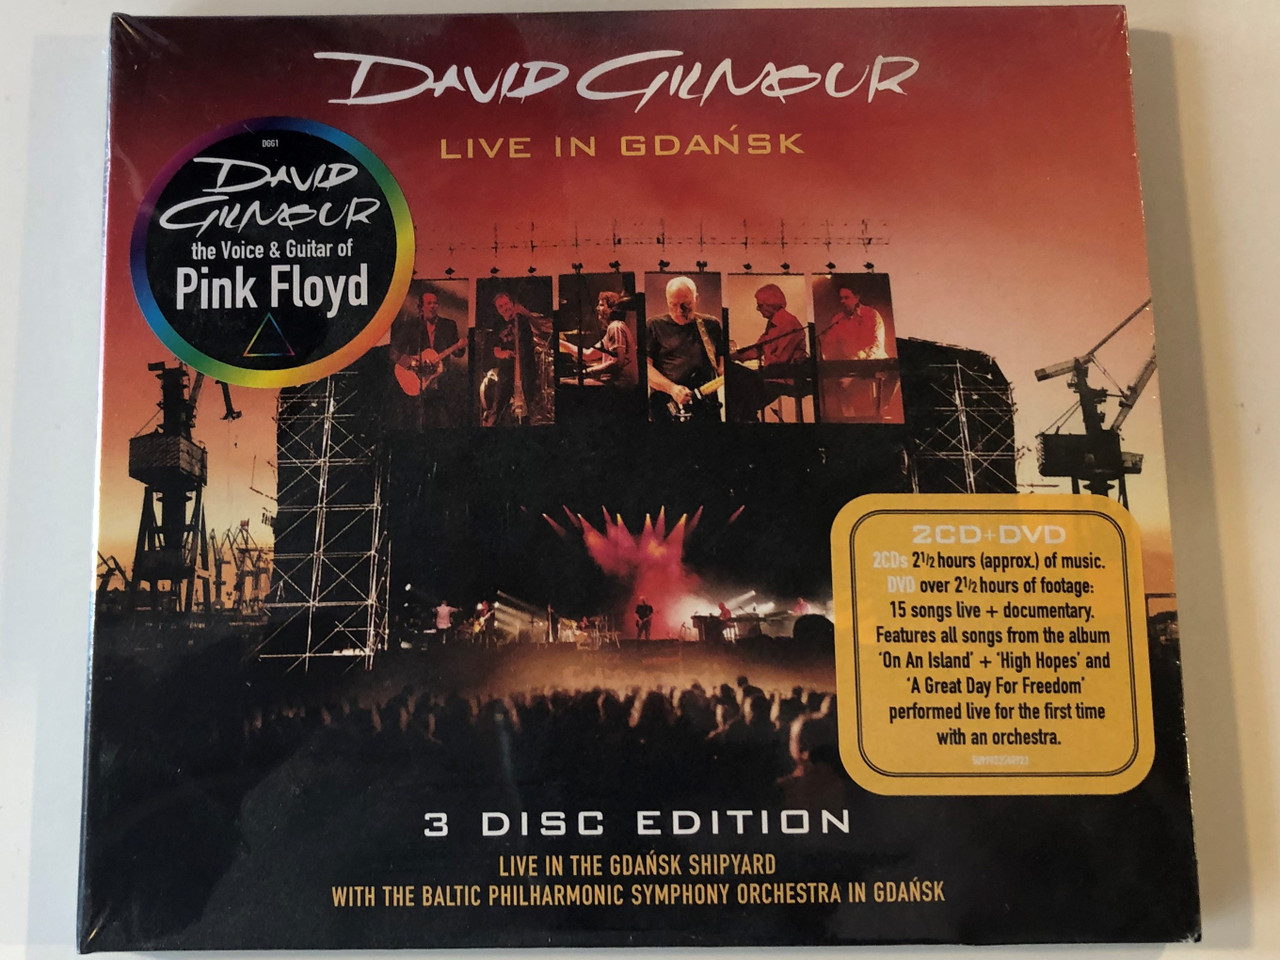 David Gilmour ‎– Live In Gdańsk / 3 Disc Edition / Live In The Gdańsk  Shipyard With The Philharmonic Symphony Orchestra In Gdańsk / David Gilmour  Music Ltd. 2x Audio CD + DVD 2005 / 5099923548923 - bibleinmylanguage